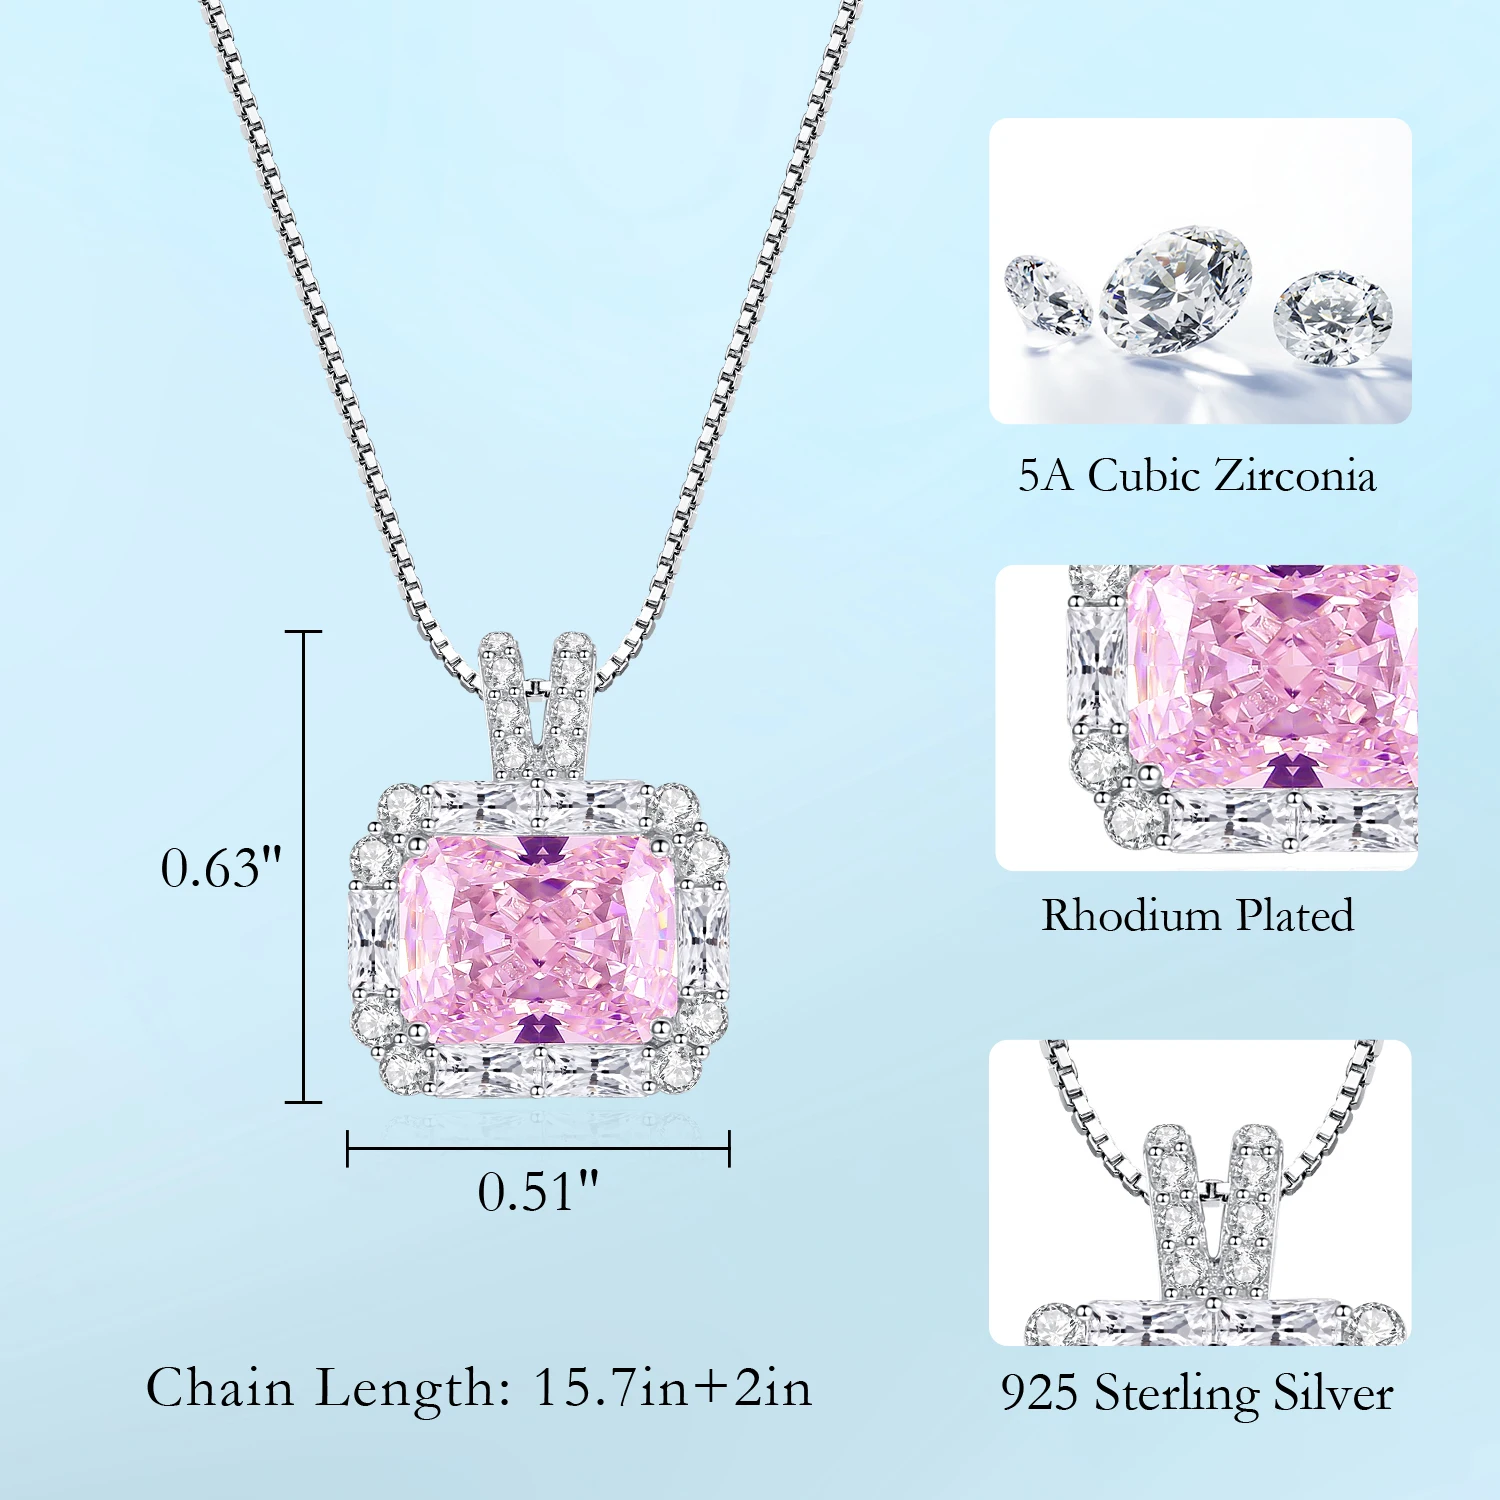 CDE WYN5 Fine Jewelry 925 Sterling Silver Necklace Wholesale Pink Cubic Zirconia Pendant Rhodium Plated Chain Pendant Necklace